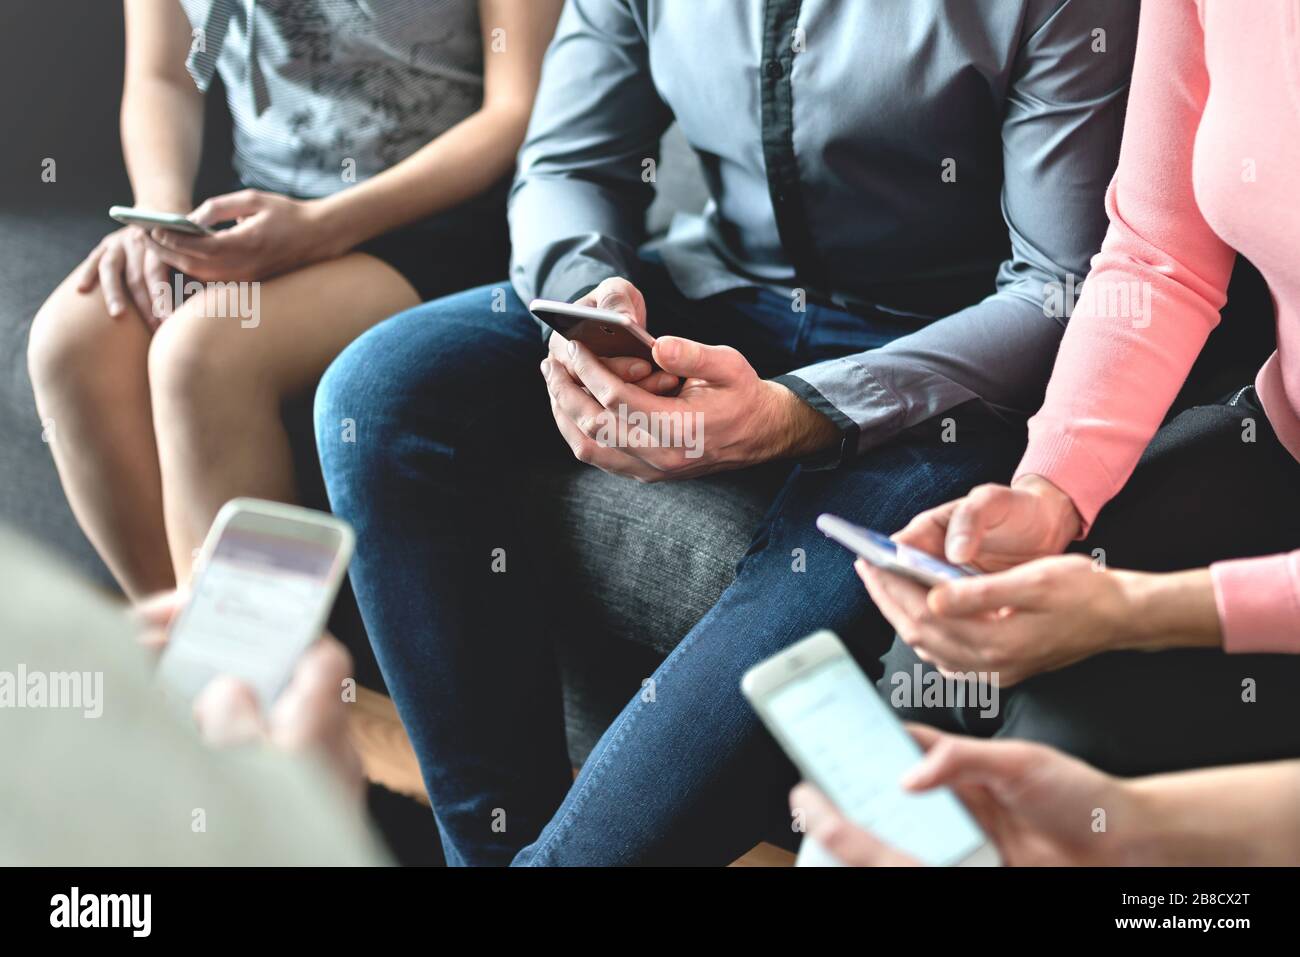 Group of millennial business people using mobile phones and sitting on couch. Networking and teamwork. Working on project with wireless technology. Stock Photo